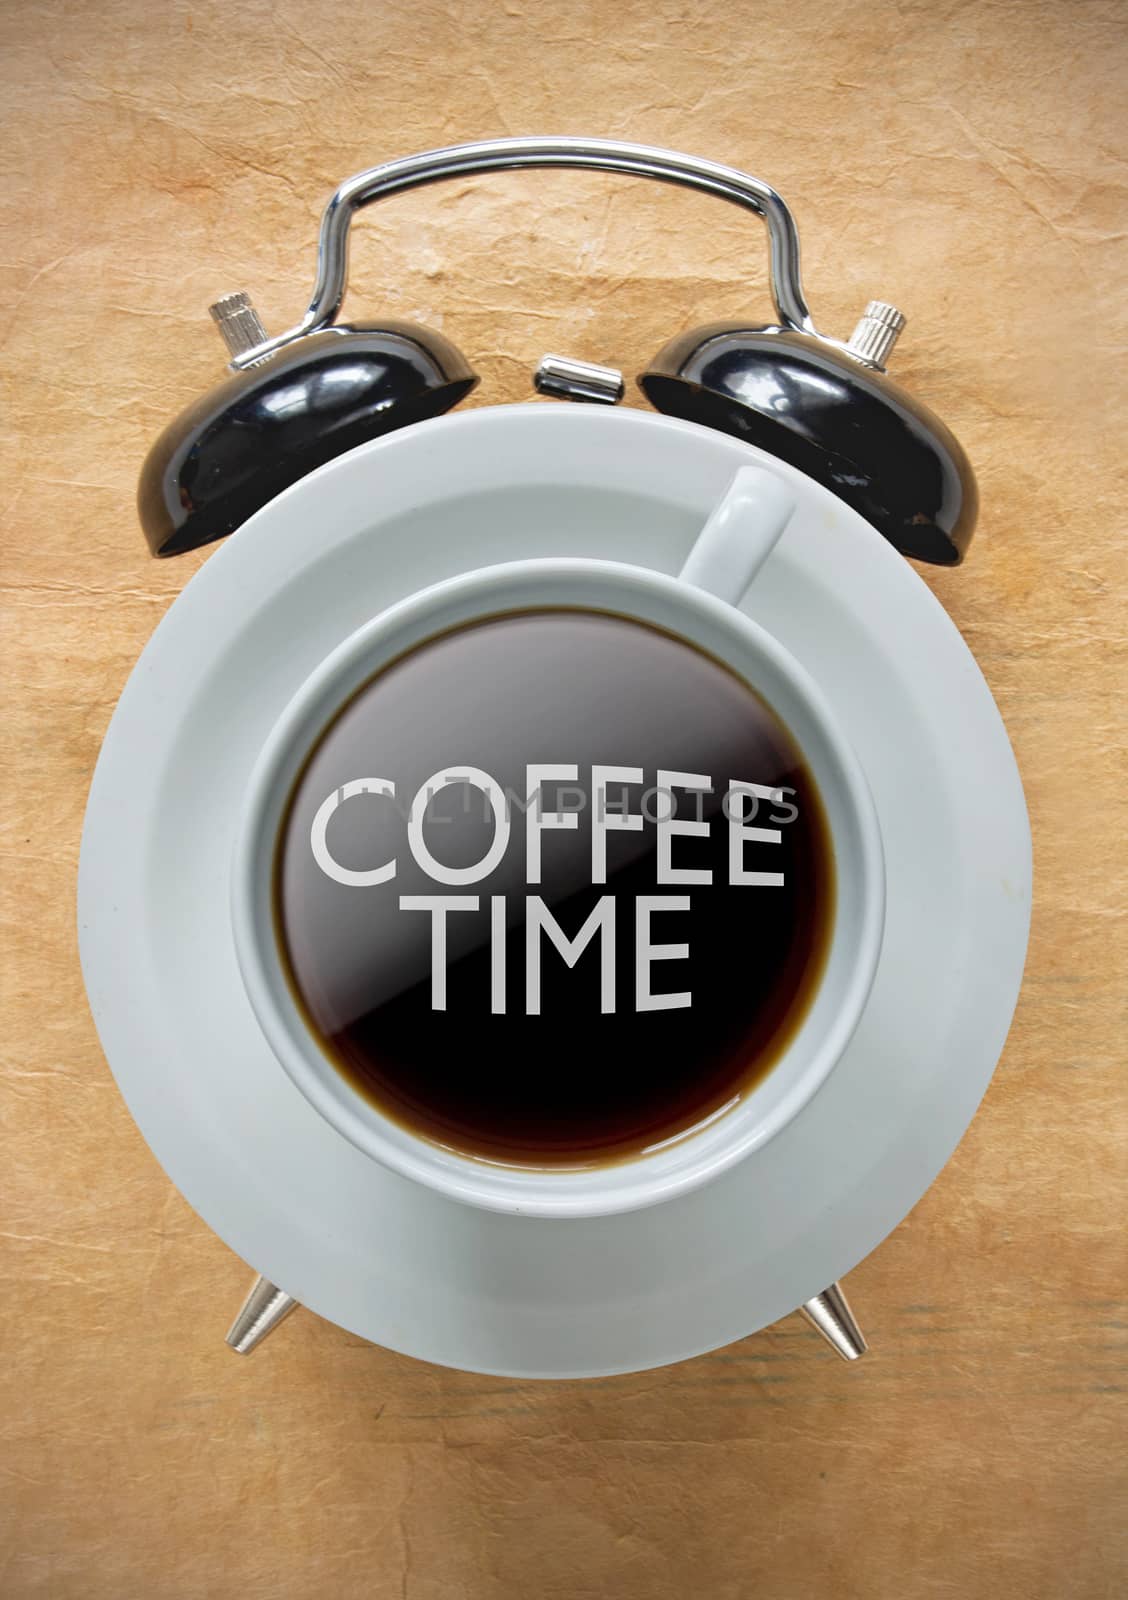 Alarm clock with coffee time in the middle